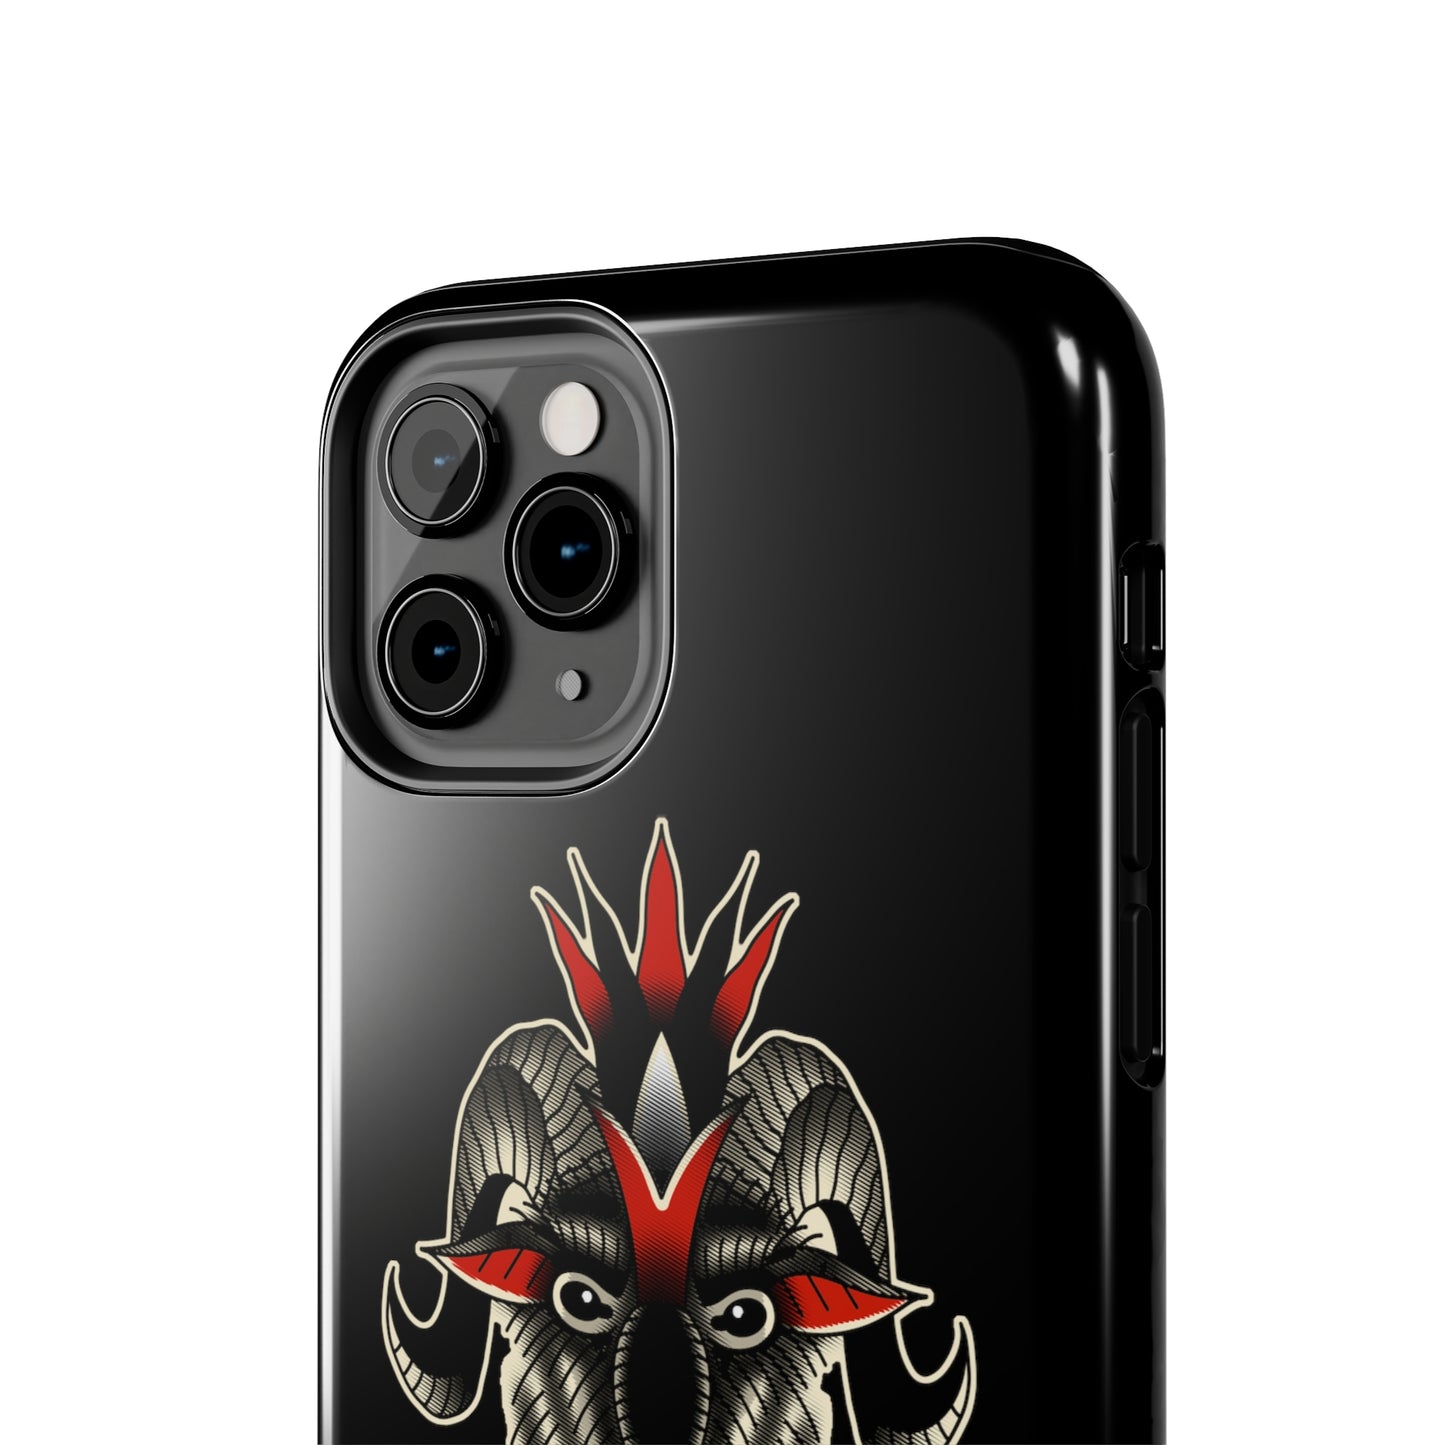 The GOAT Tough Case For Iphone